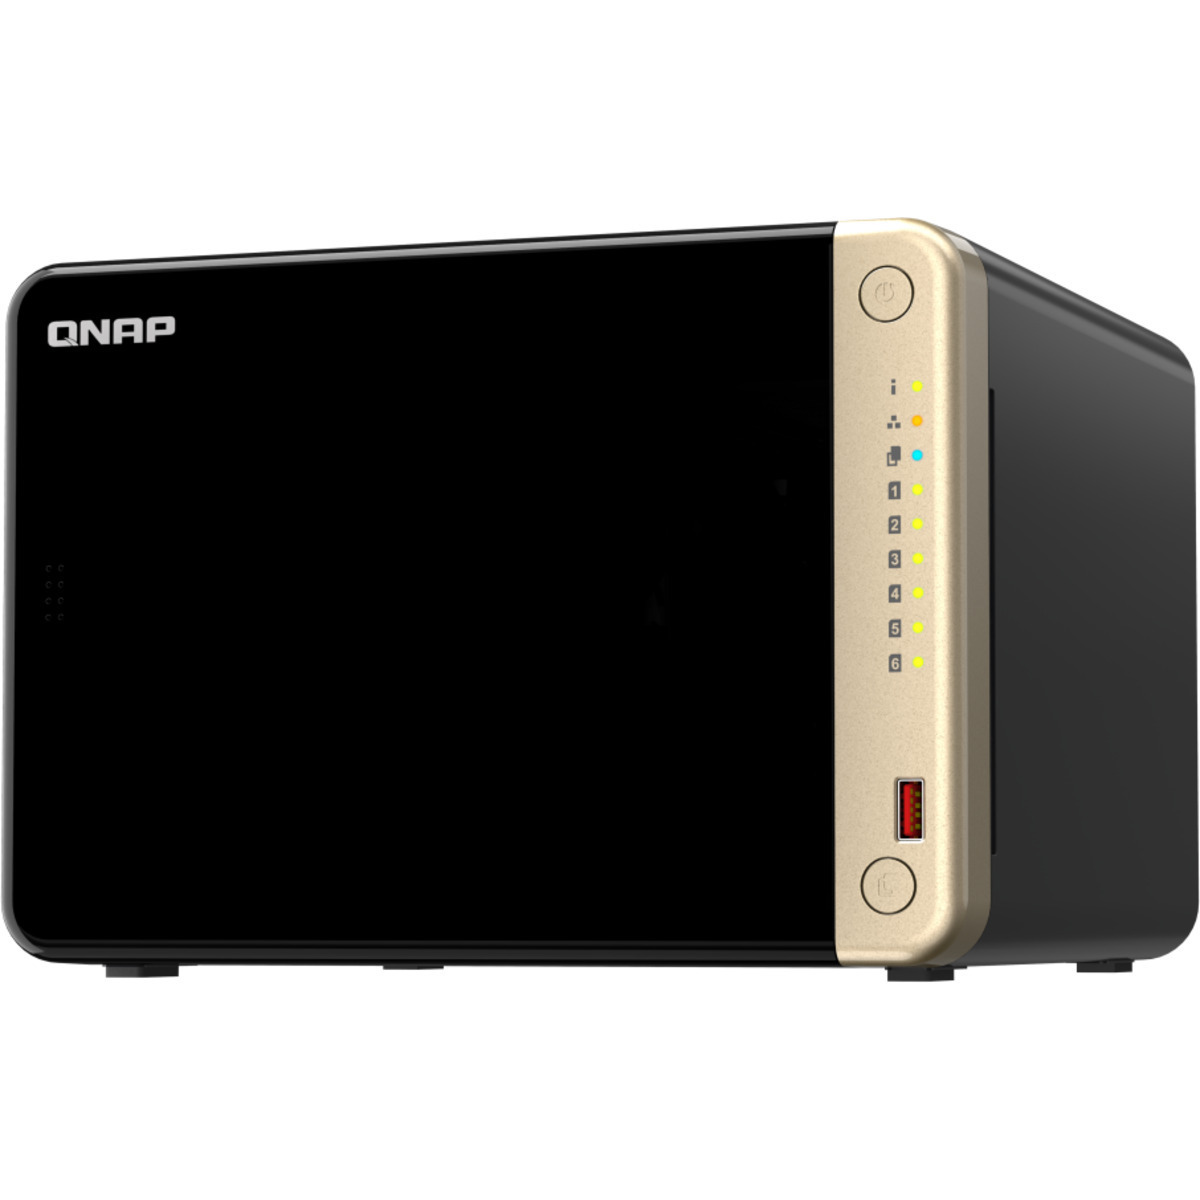 QNAP TS-664 24tb 6-Bay Desktop Multimedia / Power User / Business NAS - Network Attached Storage Device 6x4tb Western Digital Red Plus WD40EFPX 3.5 5400rpm SATA 6Gb/s HDD NAS Class Drives Installed - Burn-In Tested TS-664